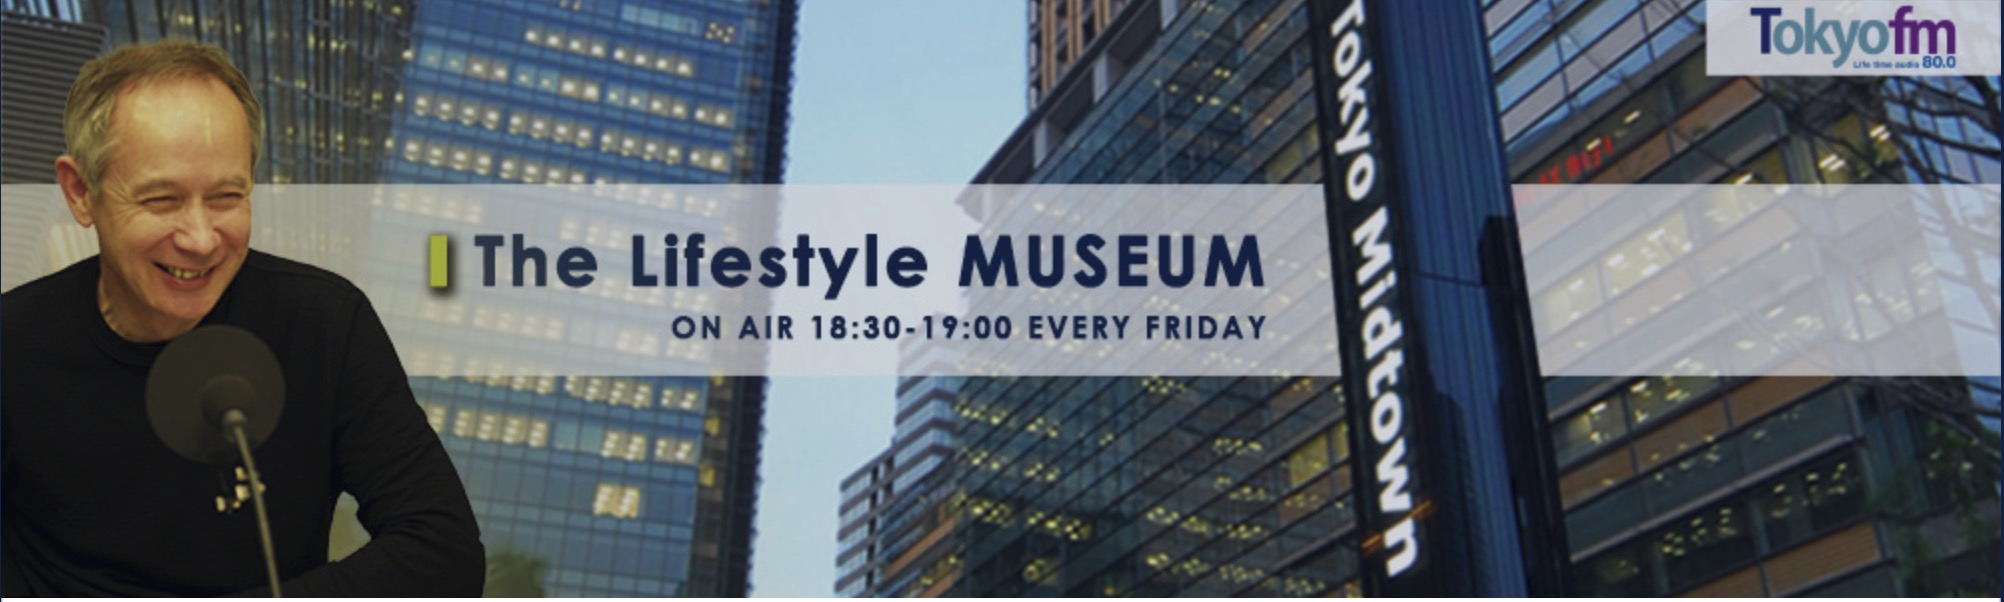 TOKYO FM「The Lifestyle MUSEUM」